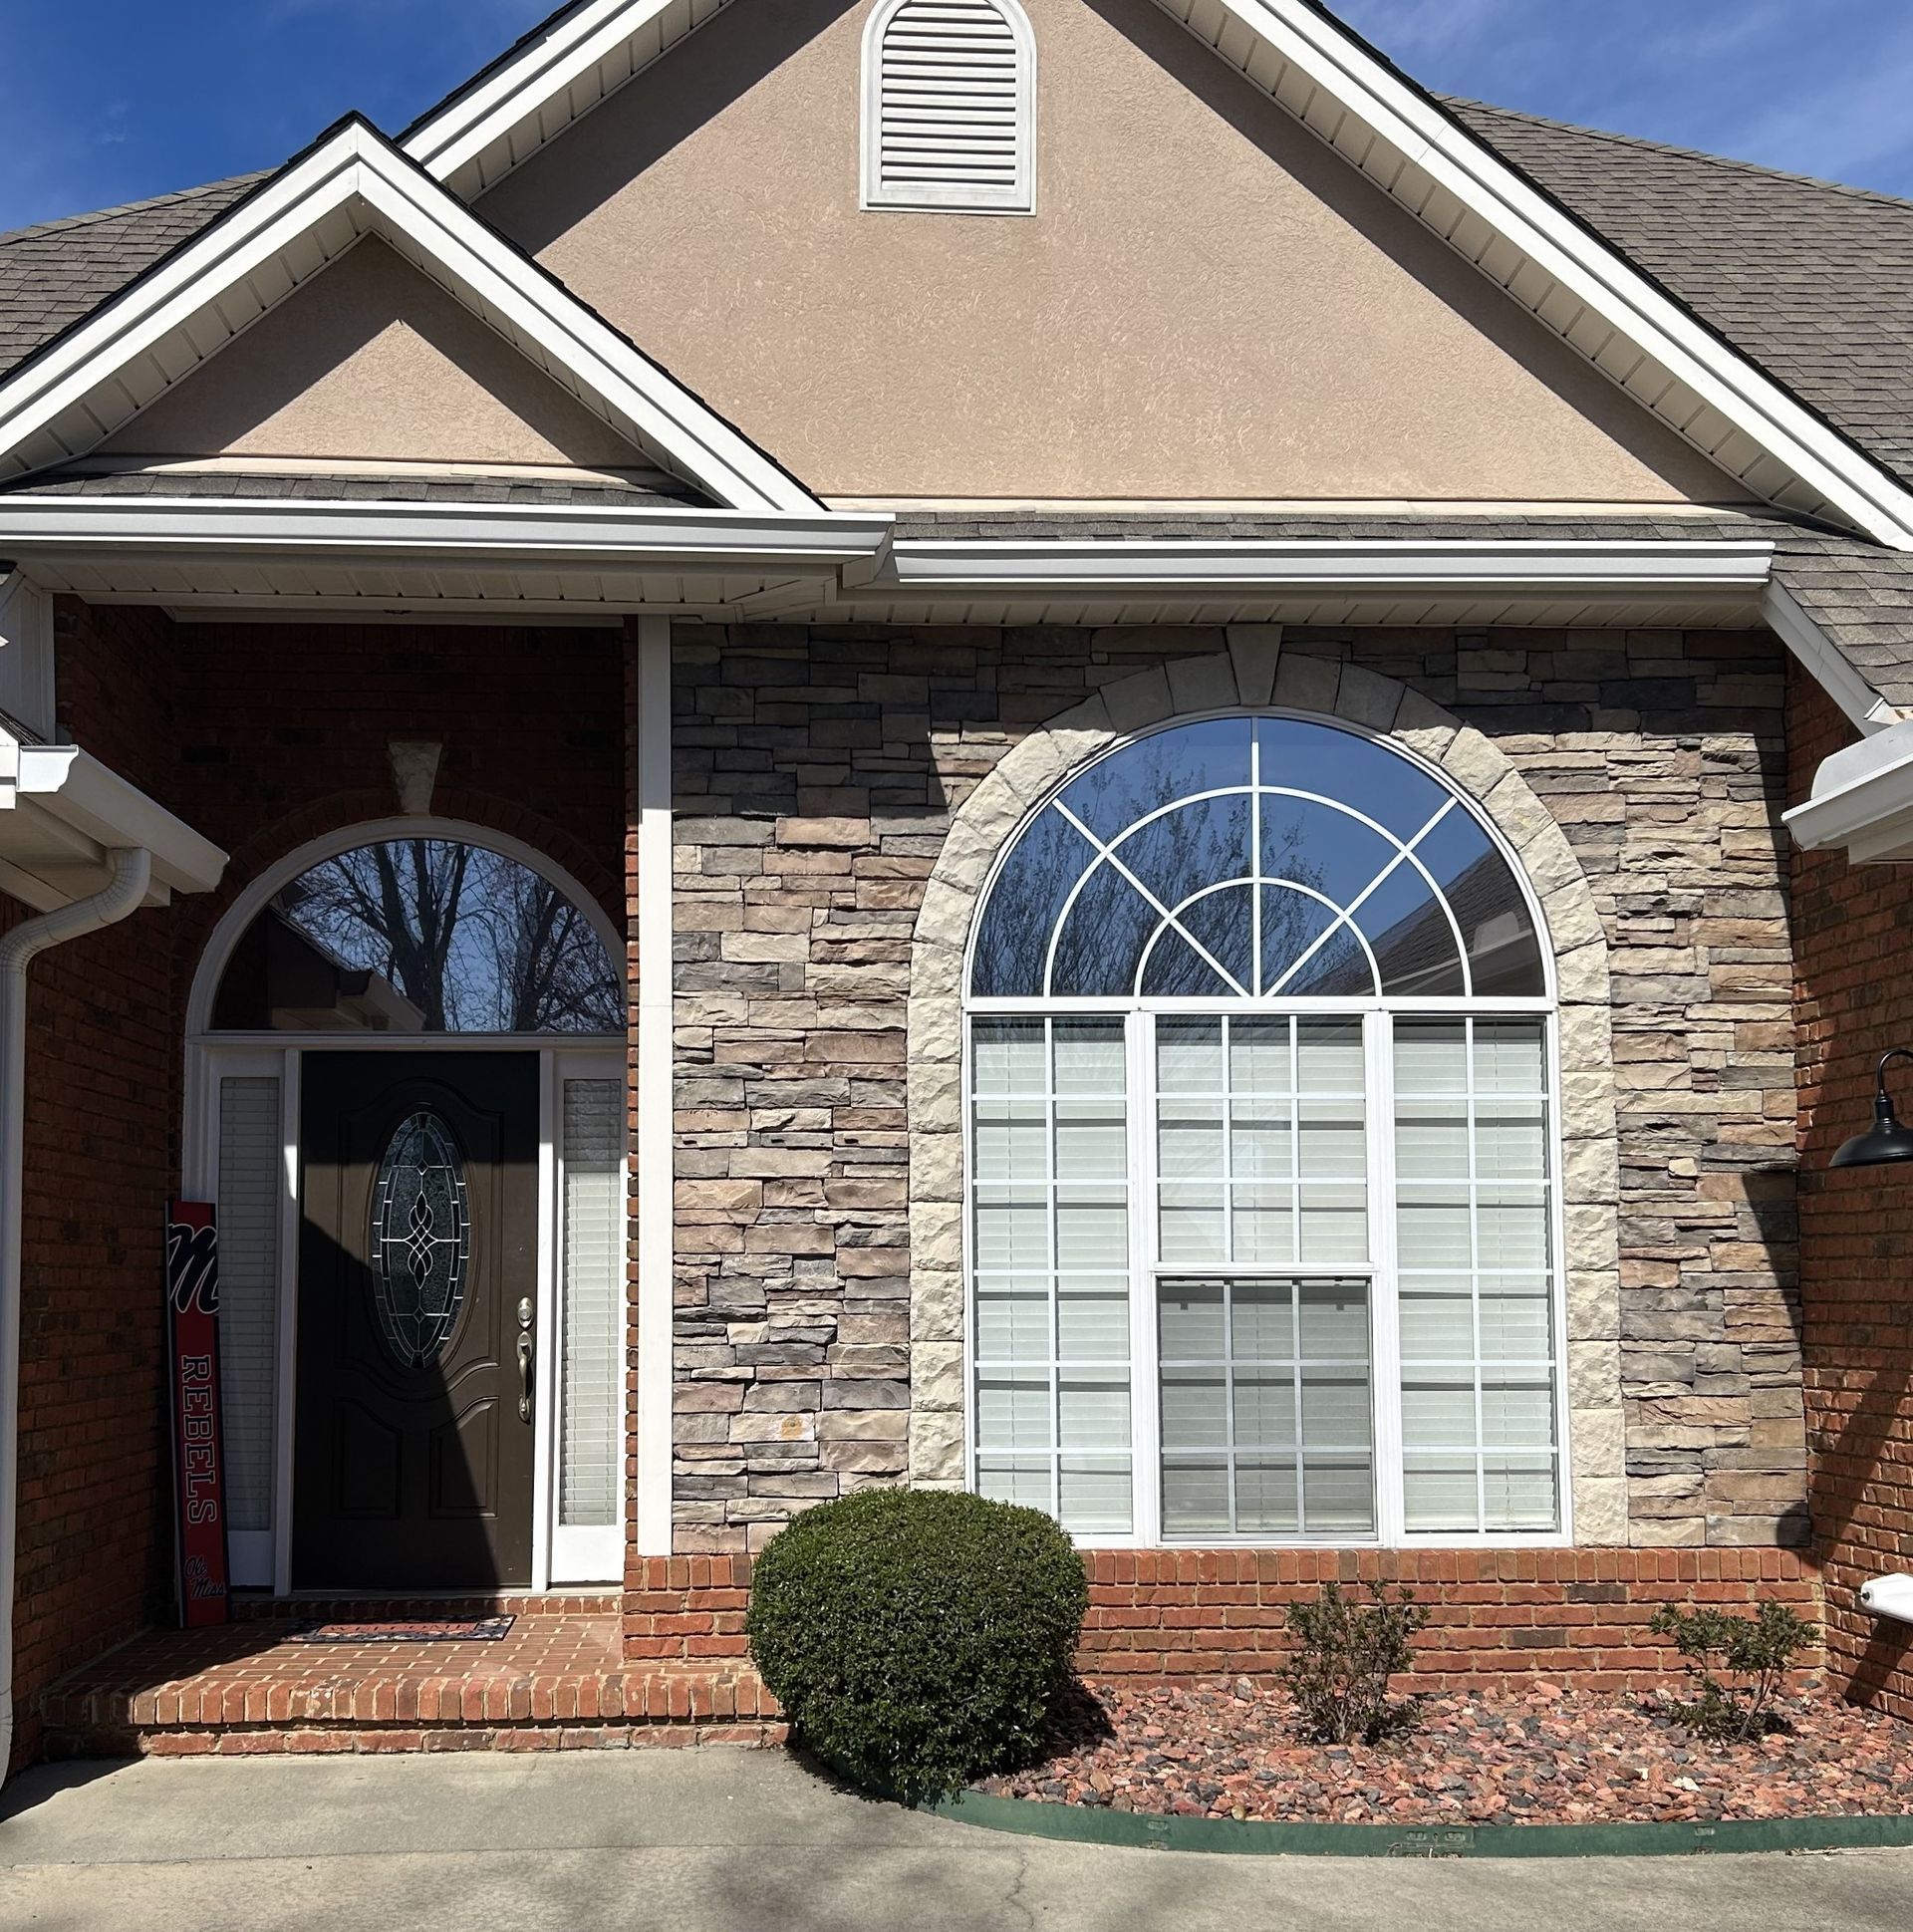 Over 85% Heat Gain blocked from home transom windows with SPF Platinum Rose Tint professionally installed. Prattville, AL